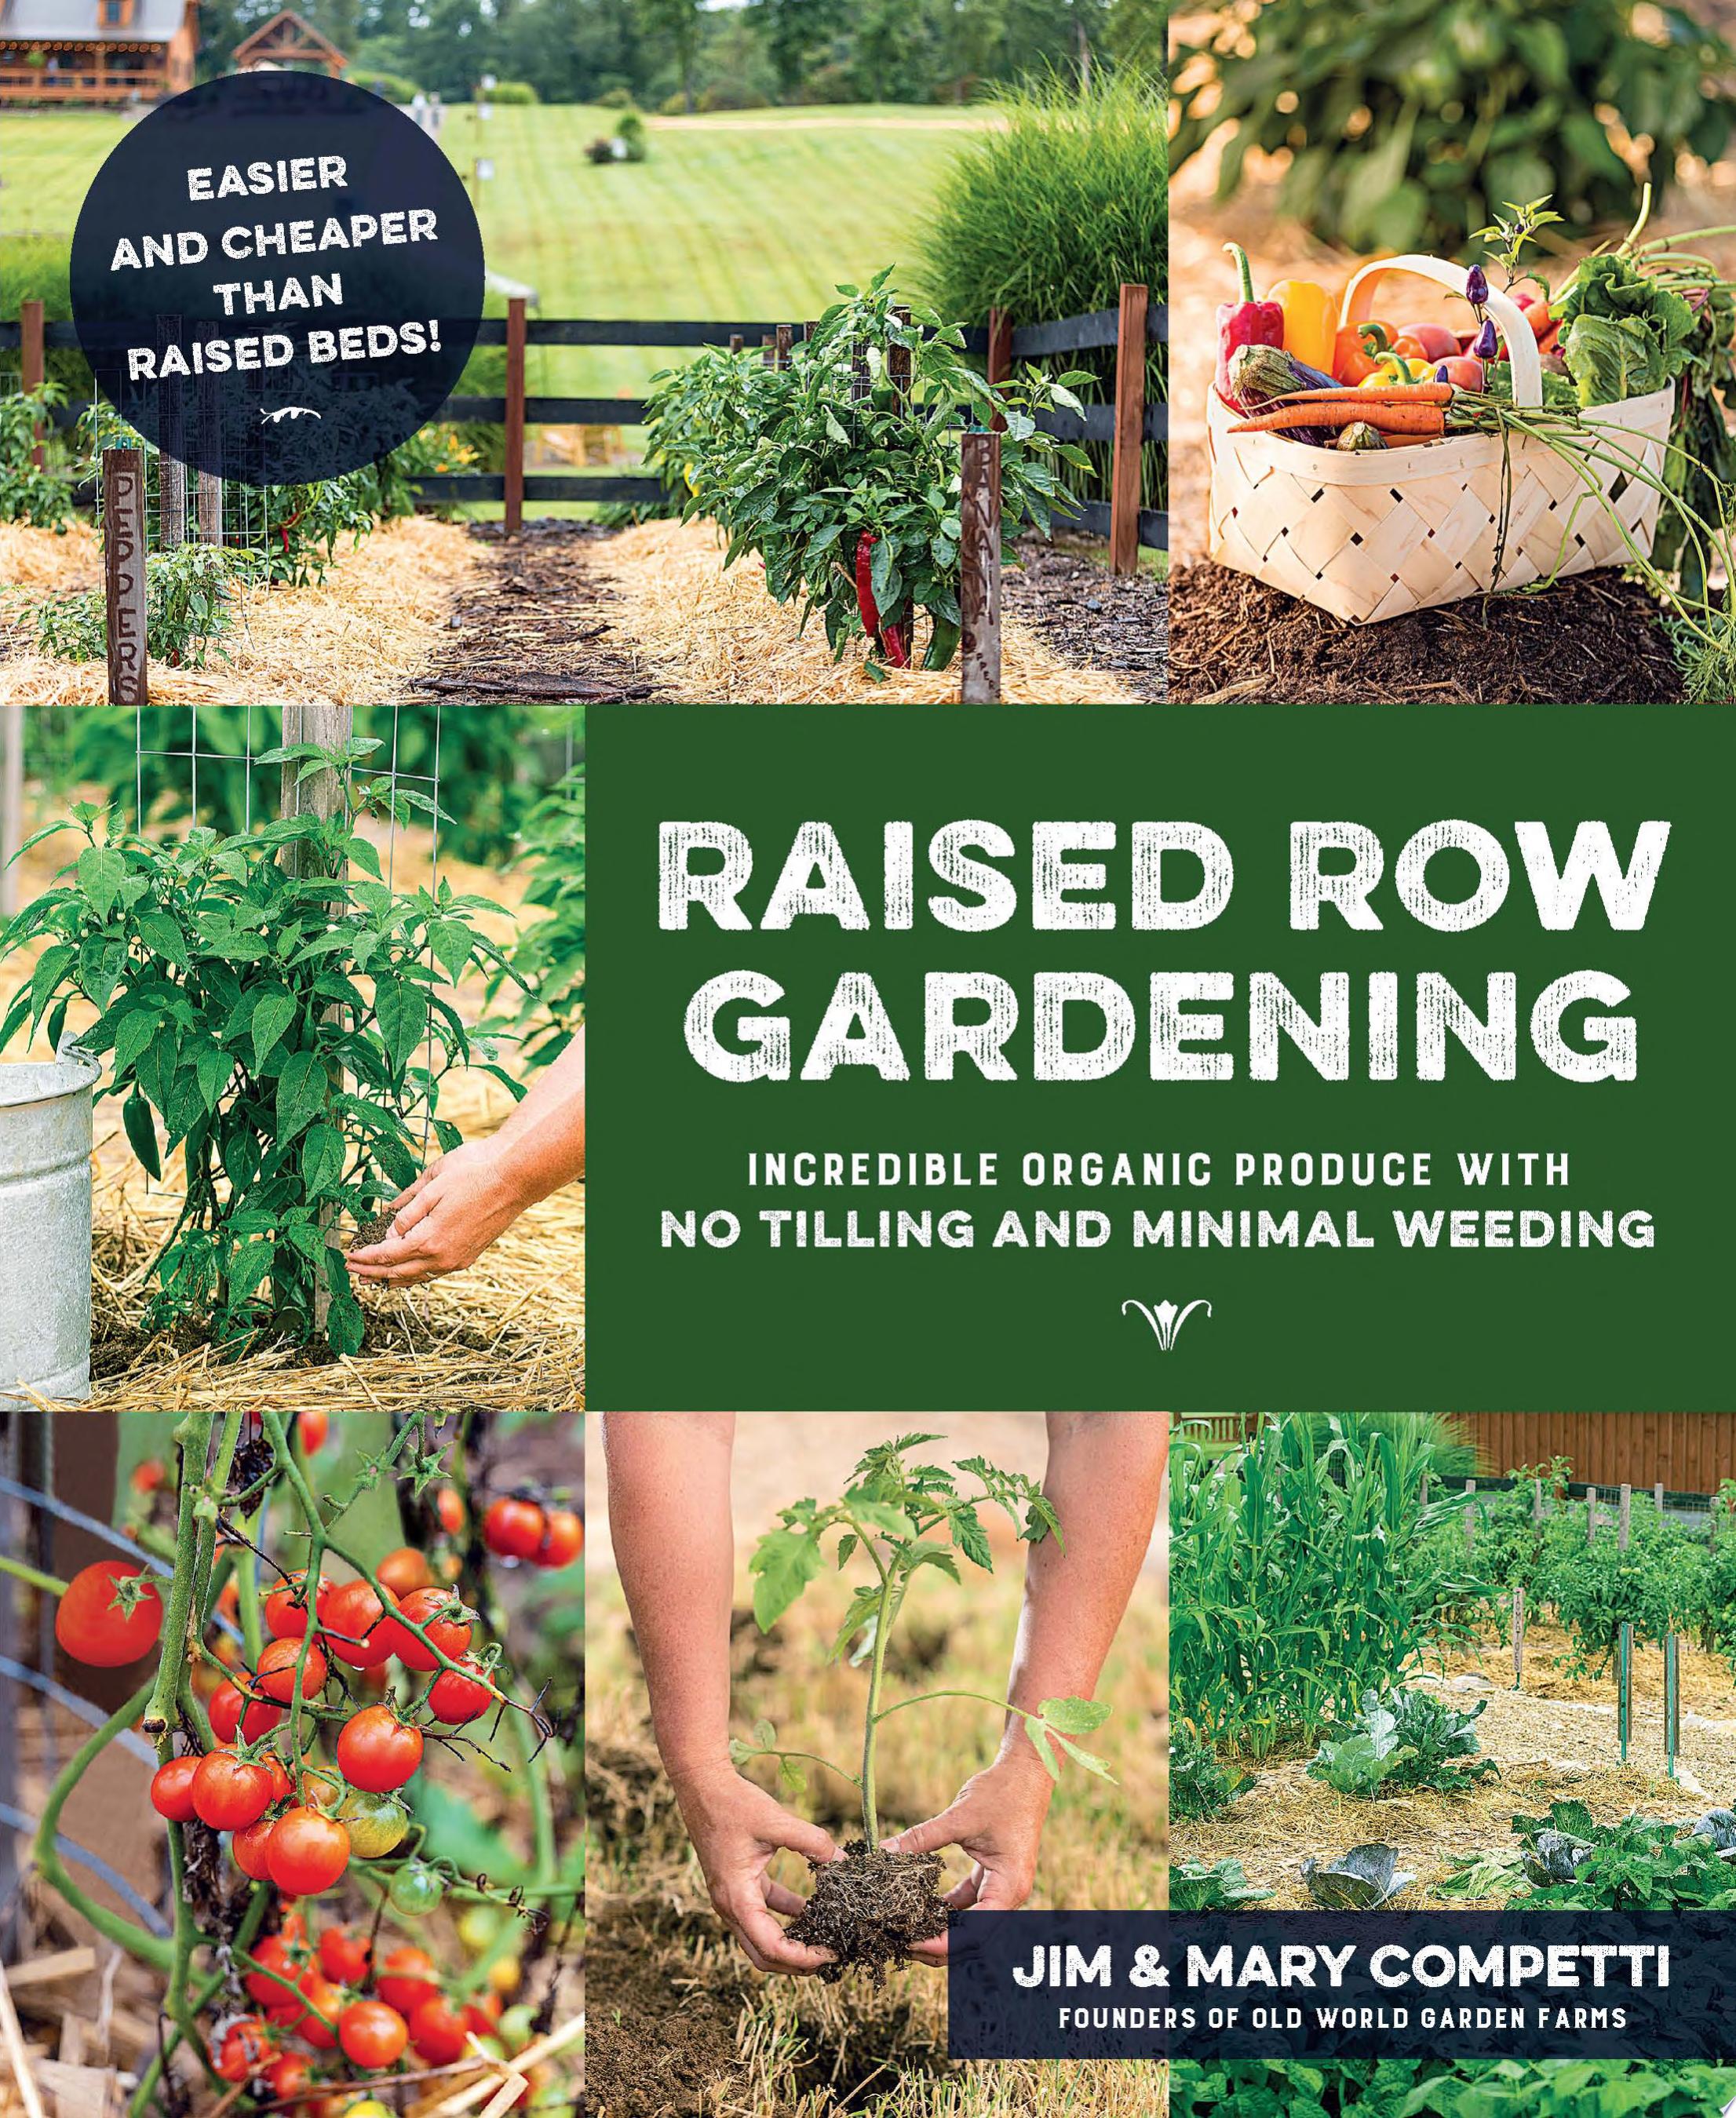 Image for "Raised Row Gardening: incredible organic produce with no tilling and minimal weeding"